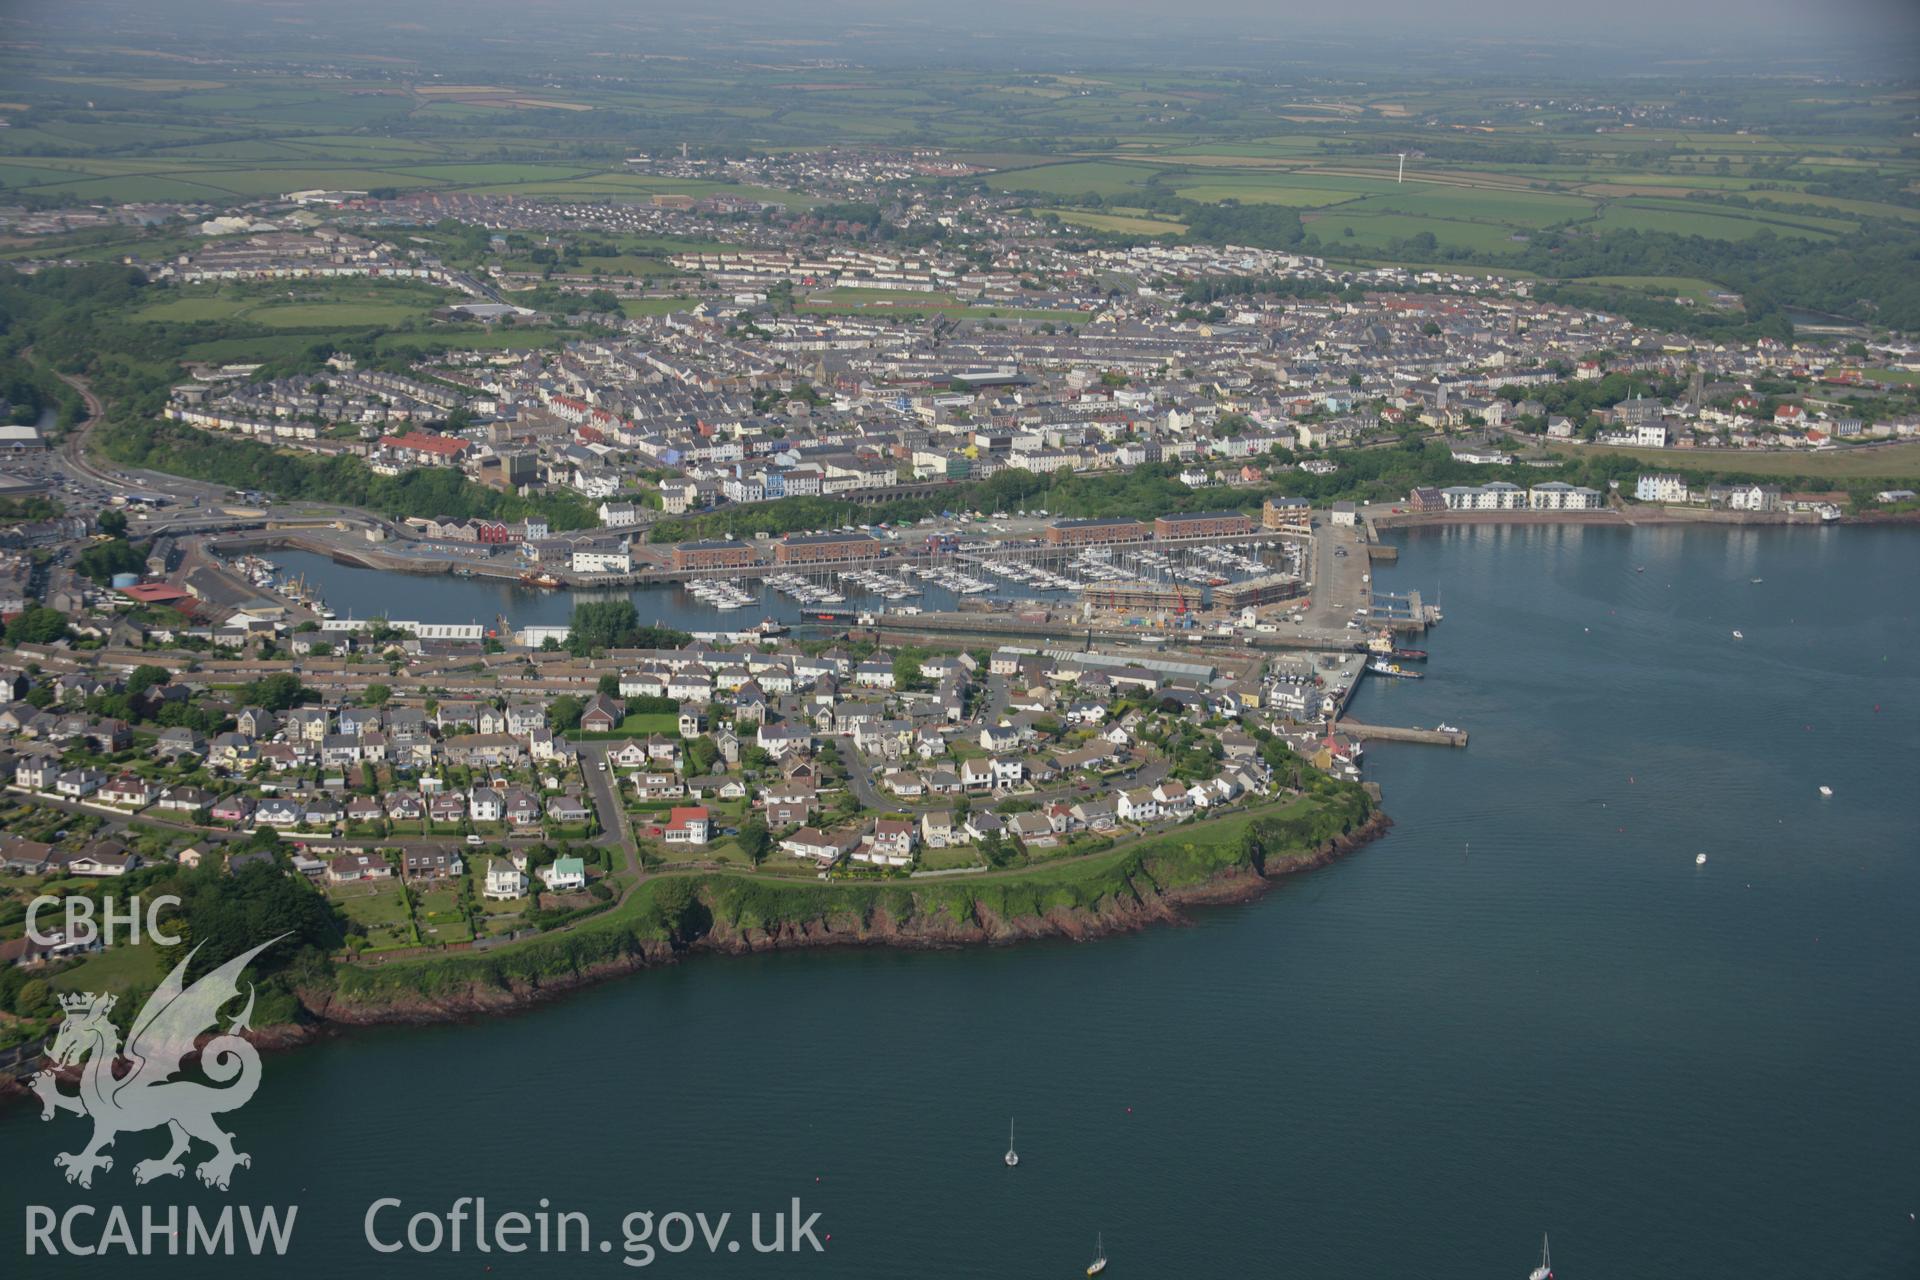 RCAHMW colour oblique aerial photograph of Milford Haven, viewed from the south-west. Taken on 08 June 2006 by Toby Driver.